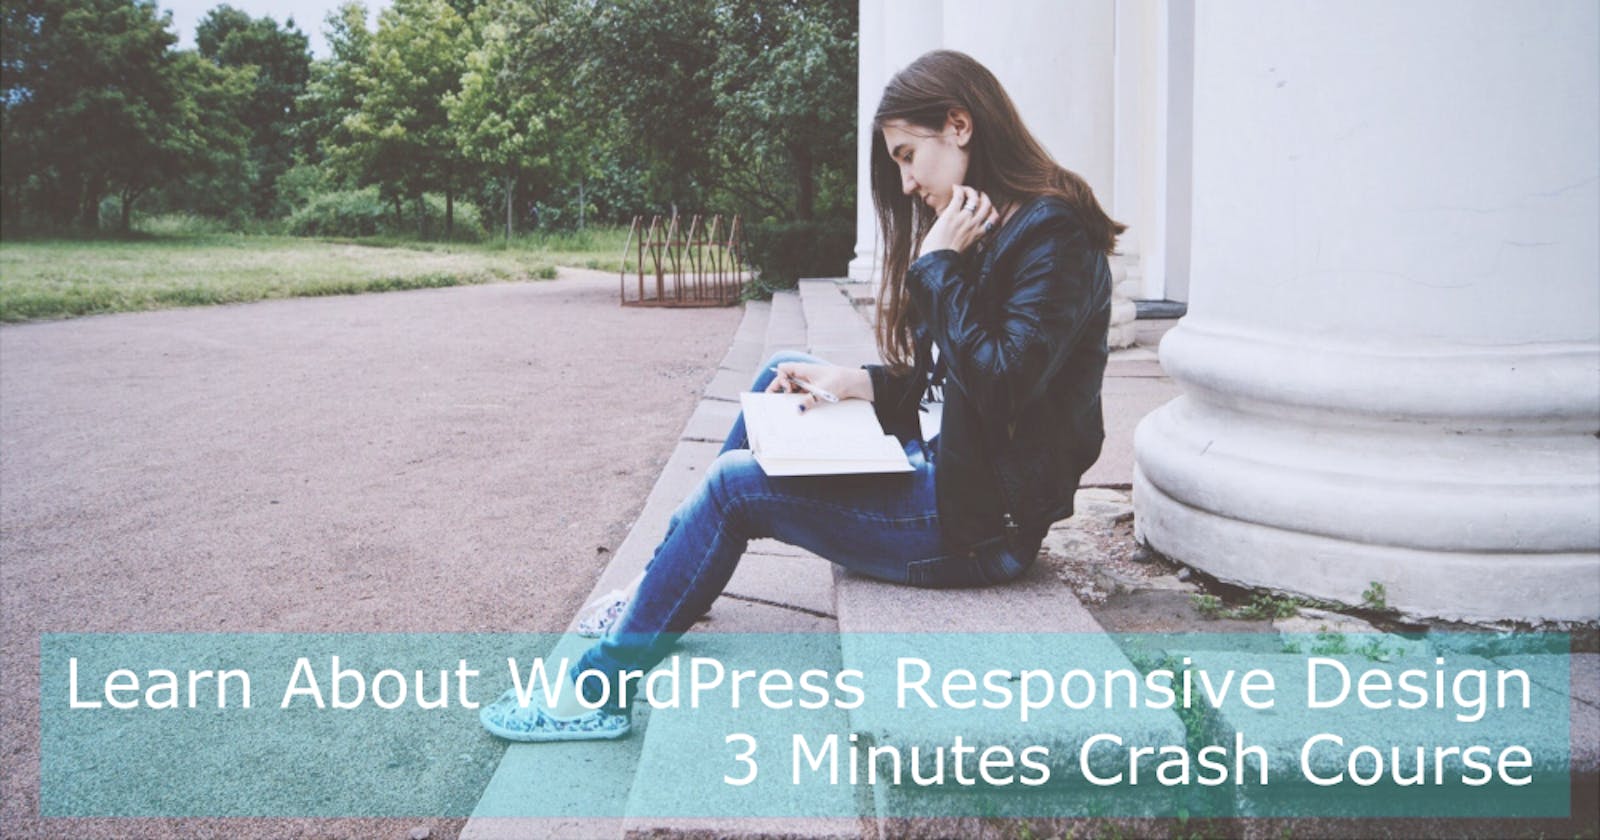 Learn About WordPress Responsive Design - 3 Minutes Crash Course